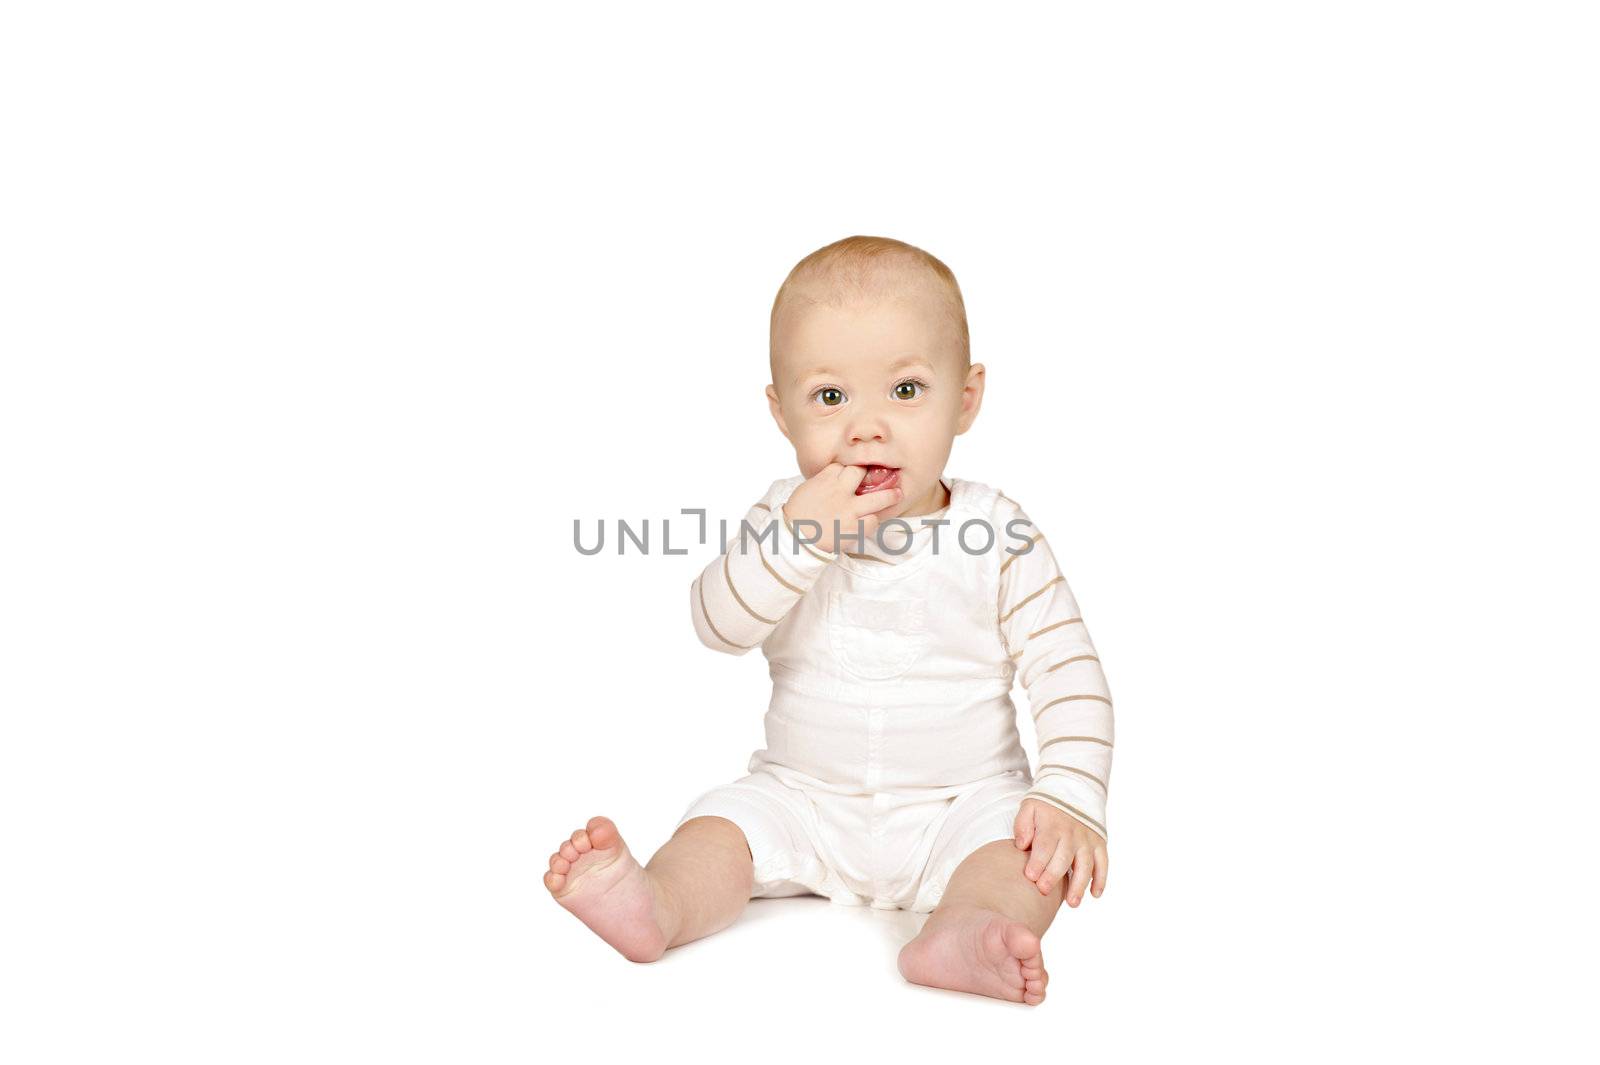 Cute little baby boy in white clothing by tish1